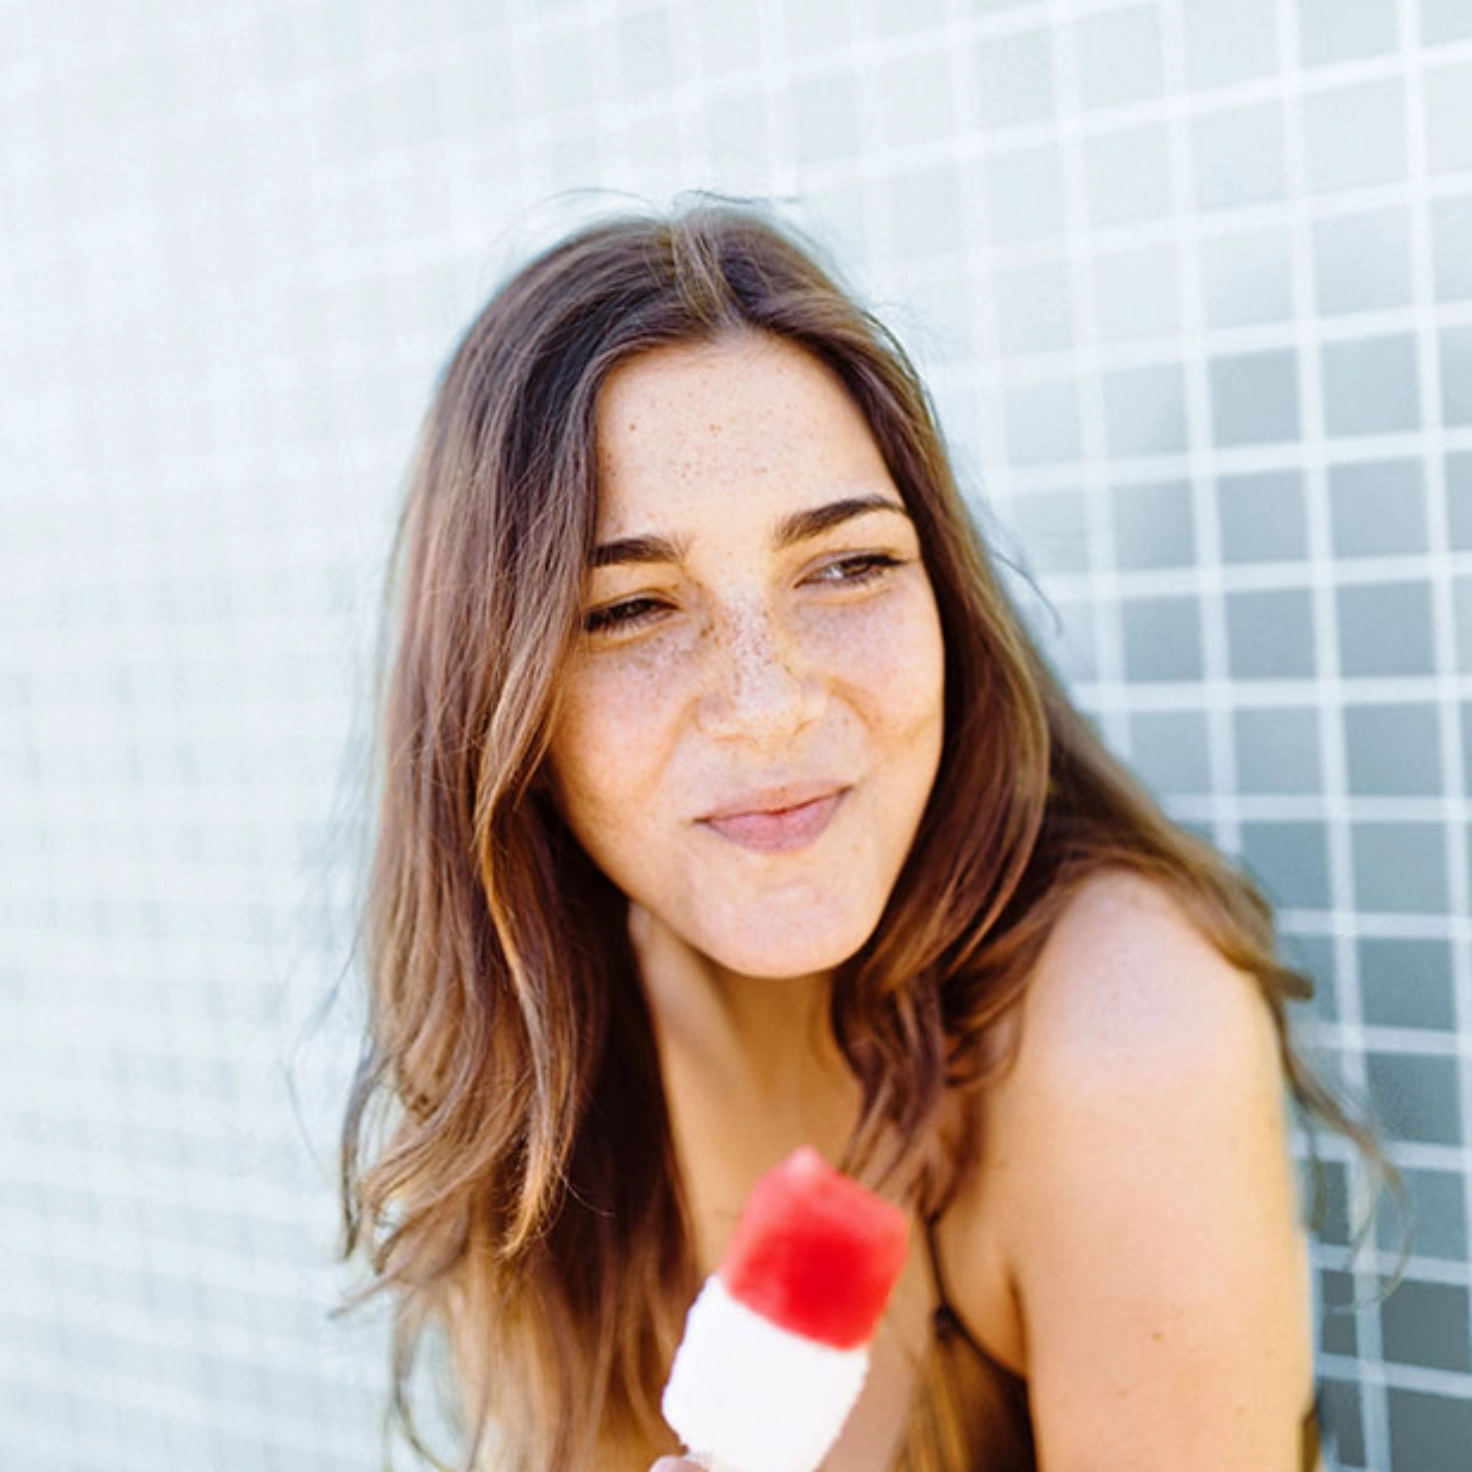 A young woman holds a popsicle in her hand and smiles.